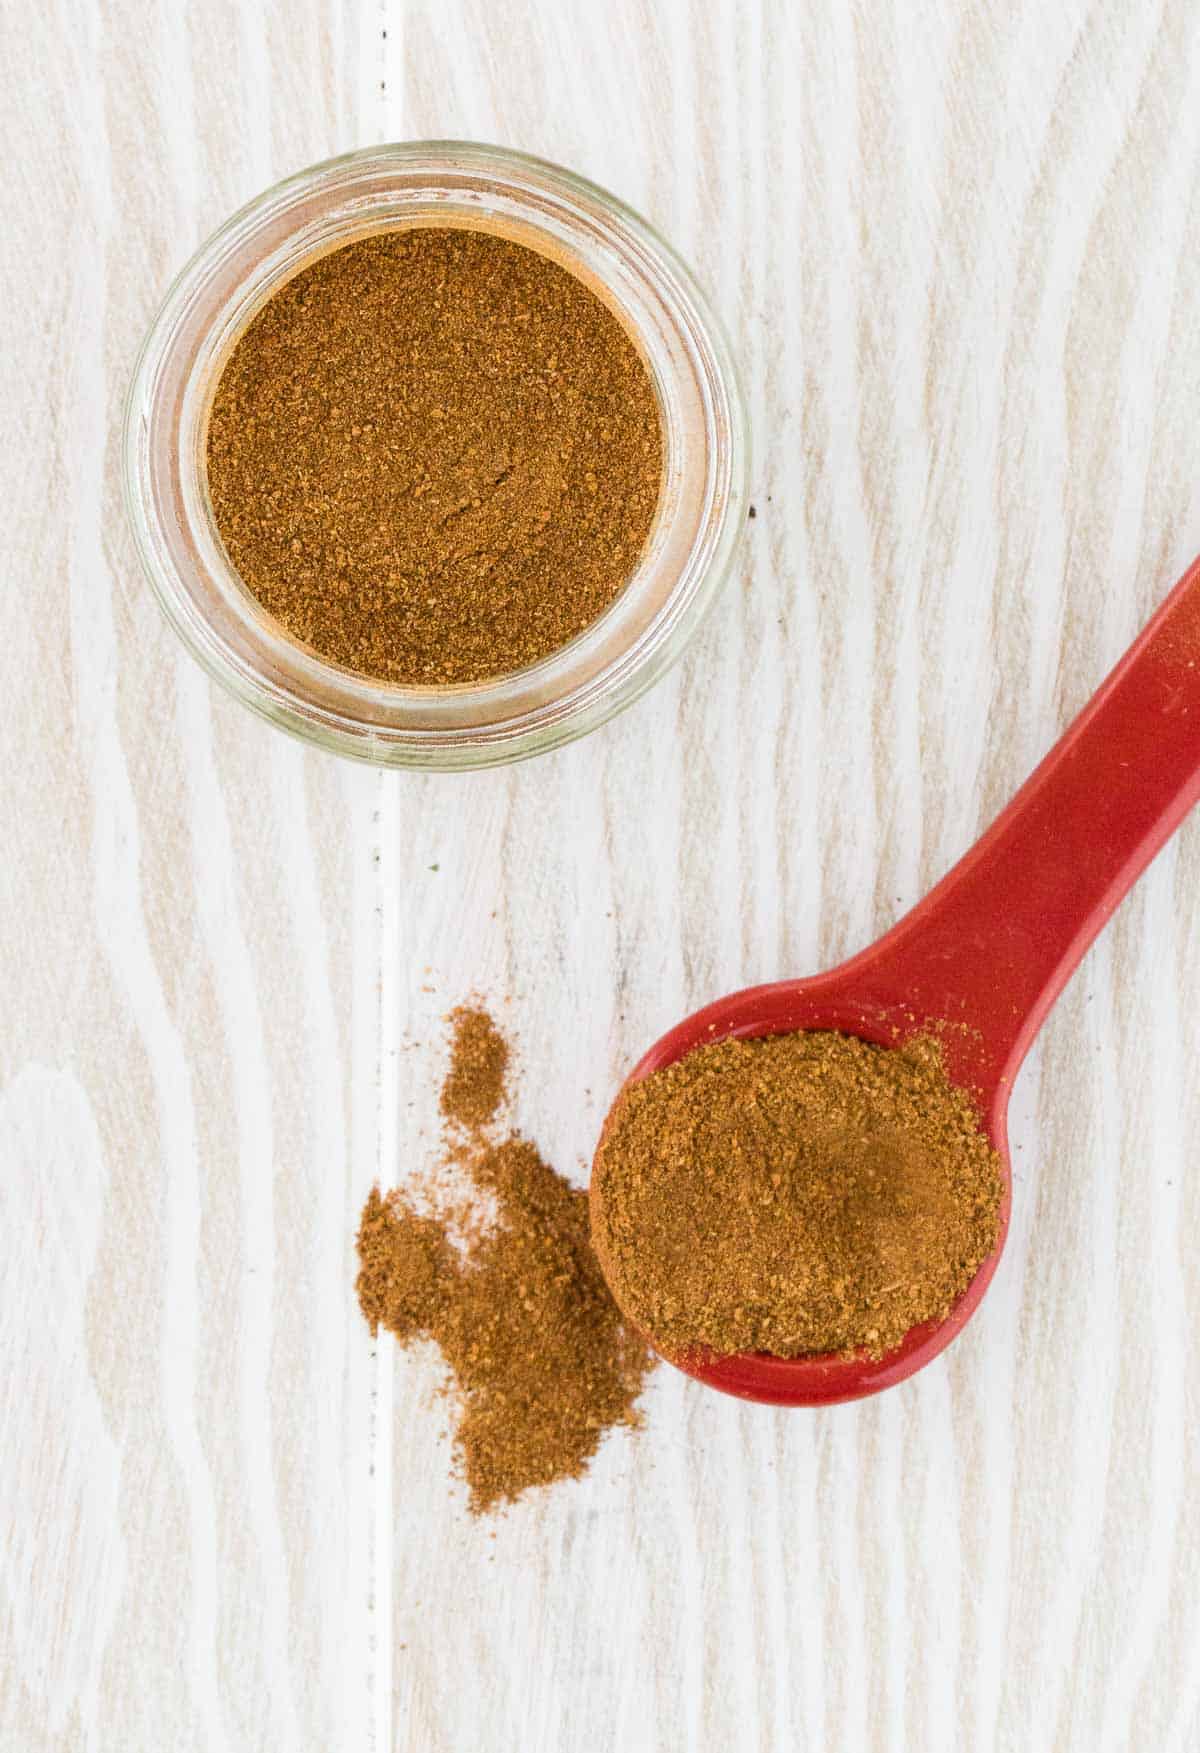 Apple pie spice mixture on a spoon, and in a jar on a white wooden background.